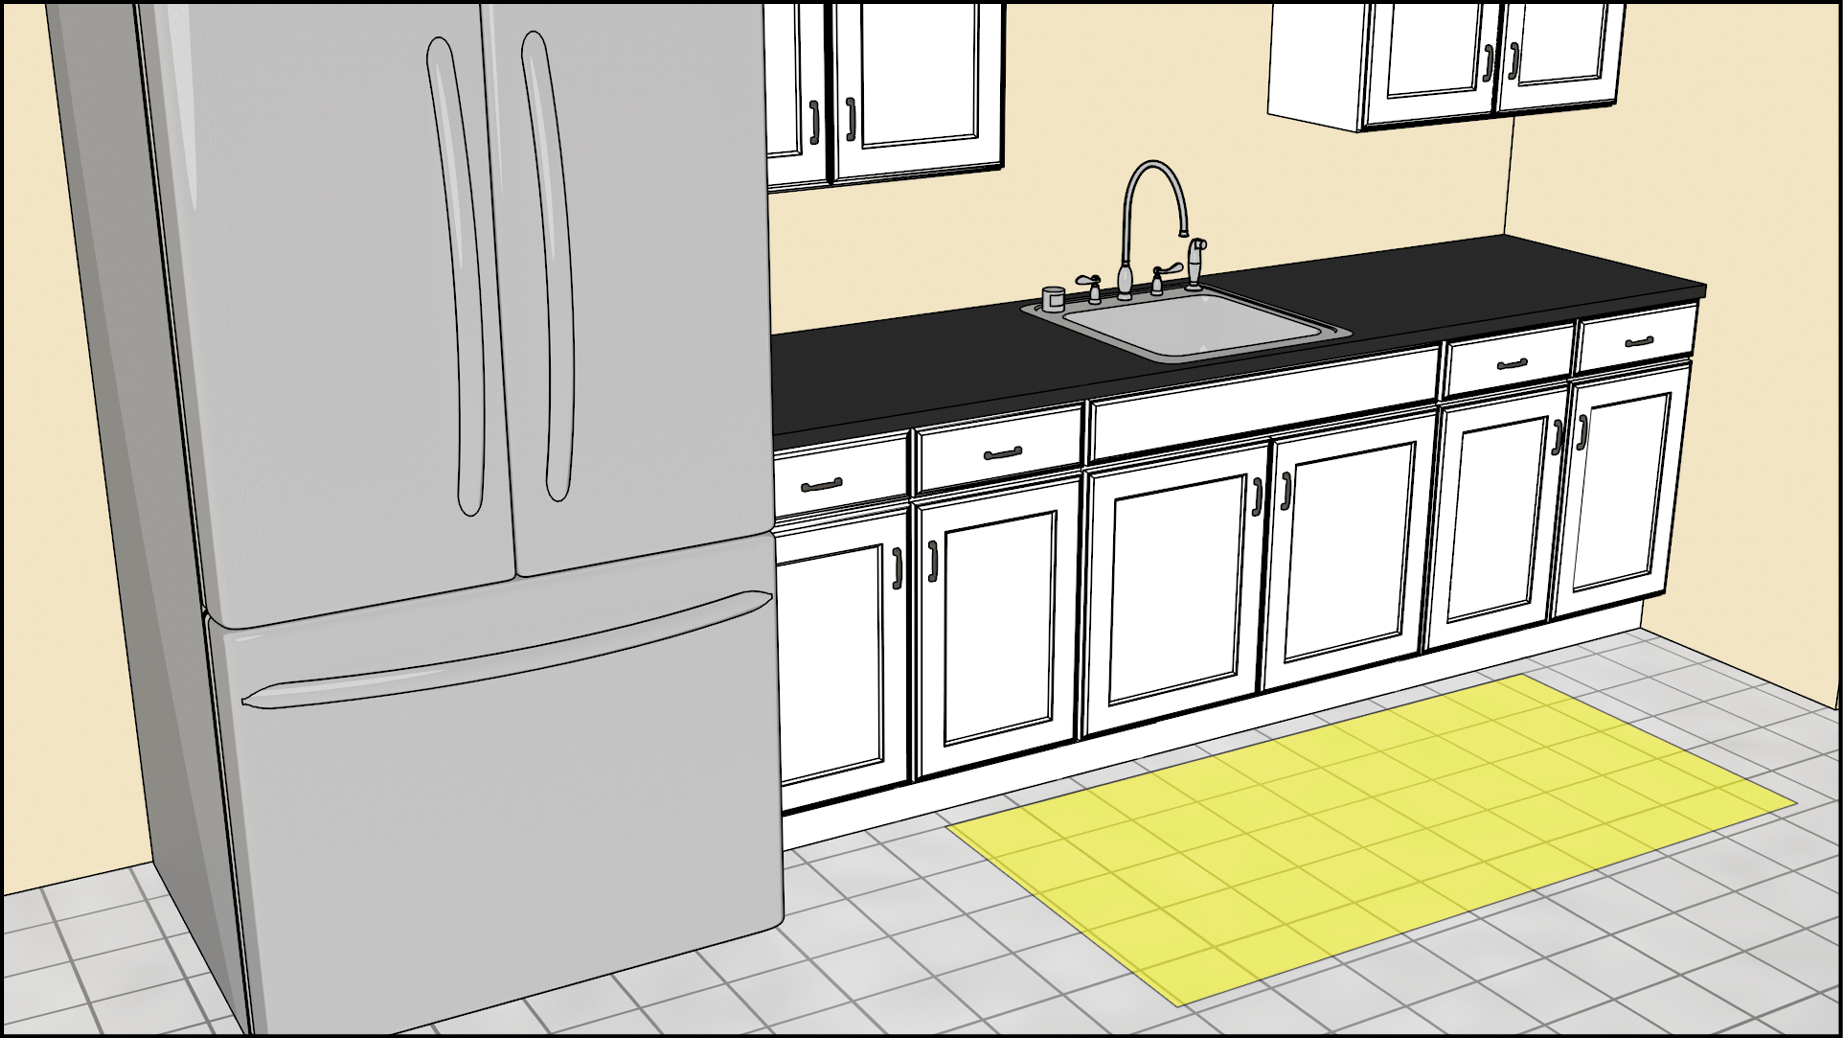 A breakroom/kitchenette with base cabinetry and no cooktop or conventional range.  Clear floor space for a parallel approach in front of the sink is highlighted.